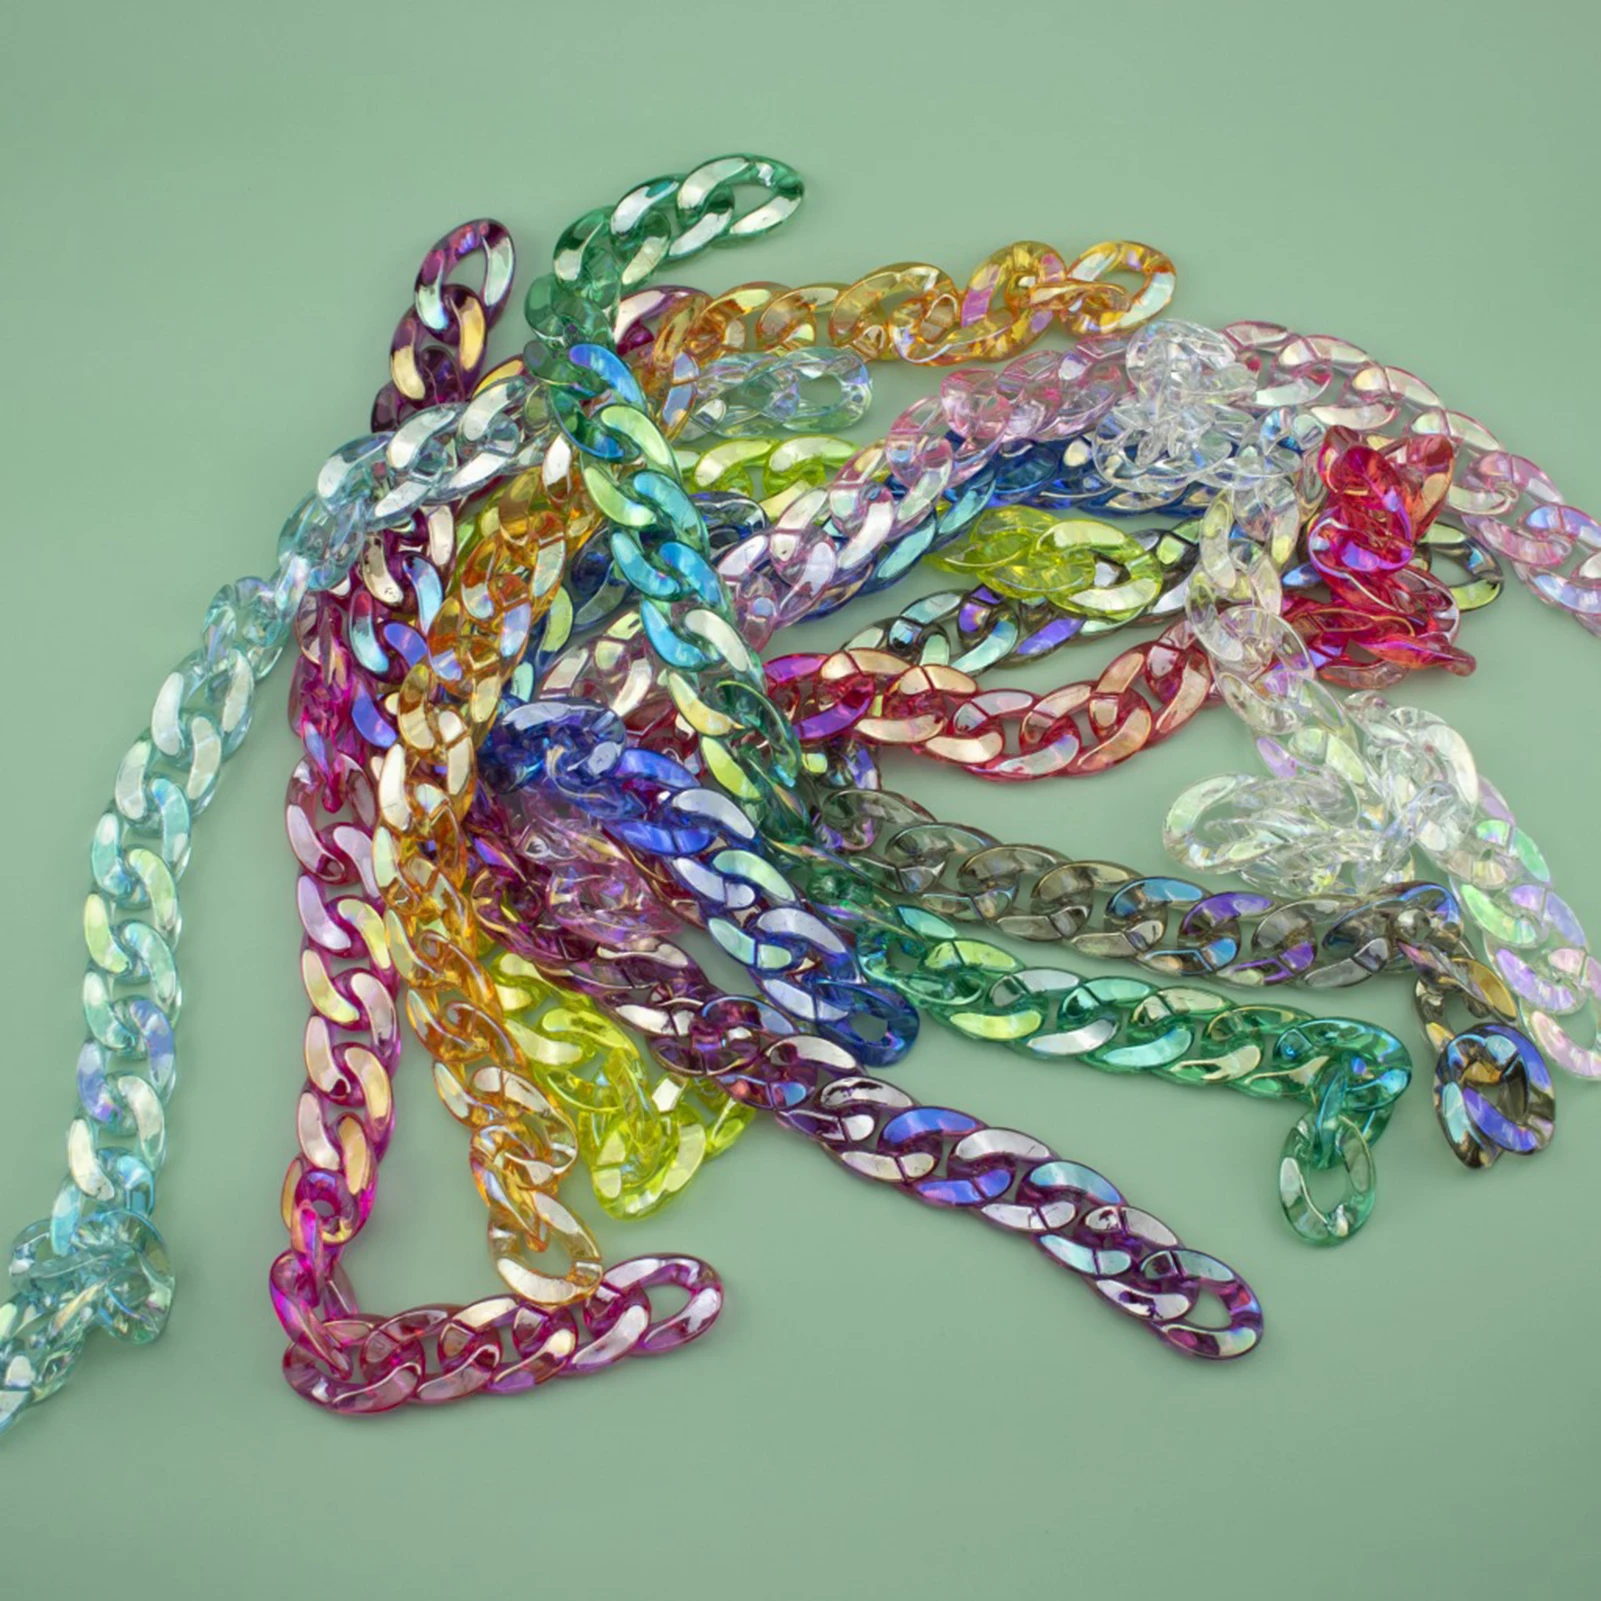 

30Pcs Twisted Chain Links Helpful Mini Multiple Colour for Lady Chain Links Acrylic Chain Link Rings